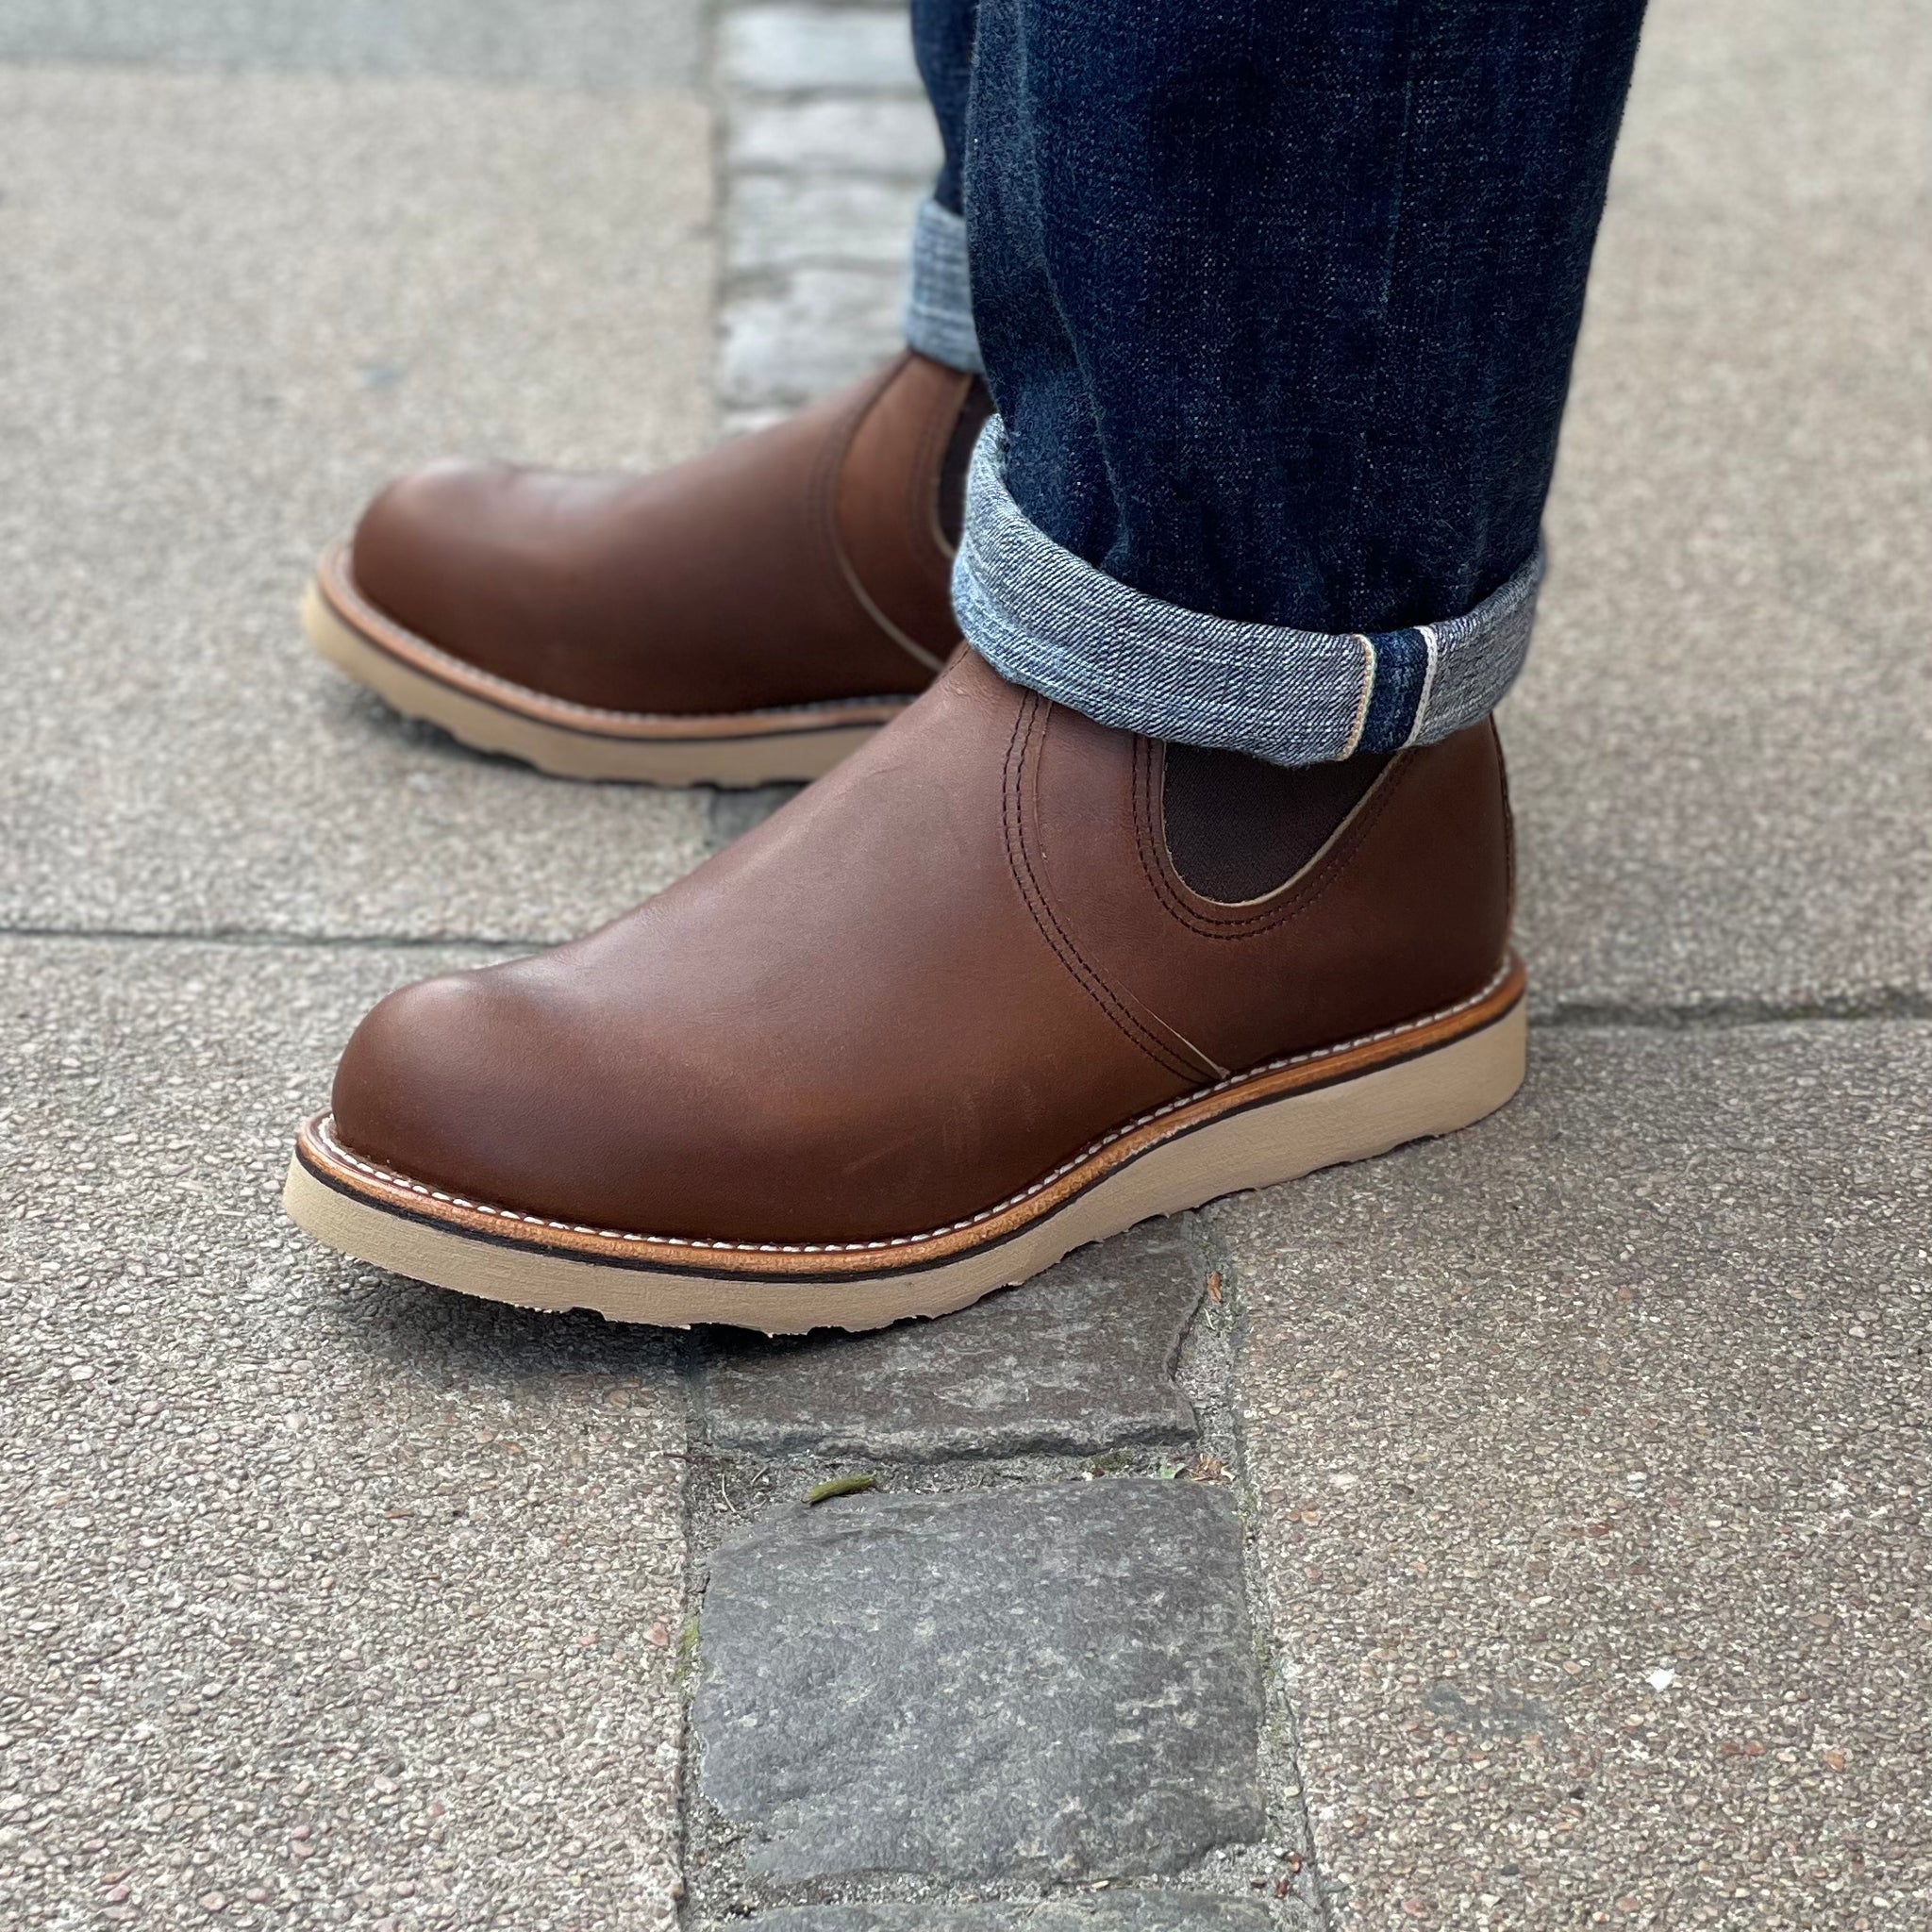 Red Wing - 3190 - Classic Chelsea (Amber Harness) - Brund